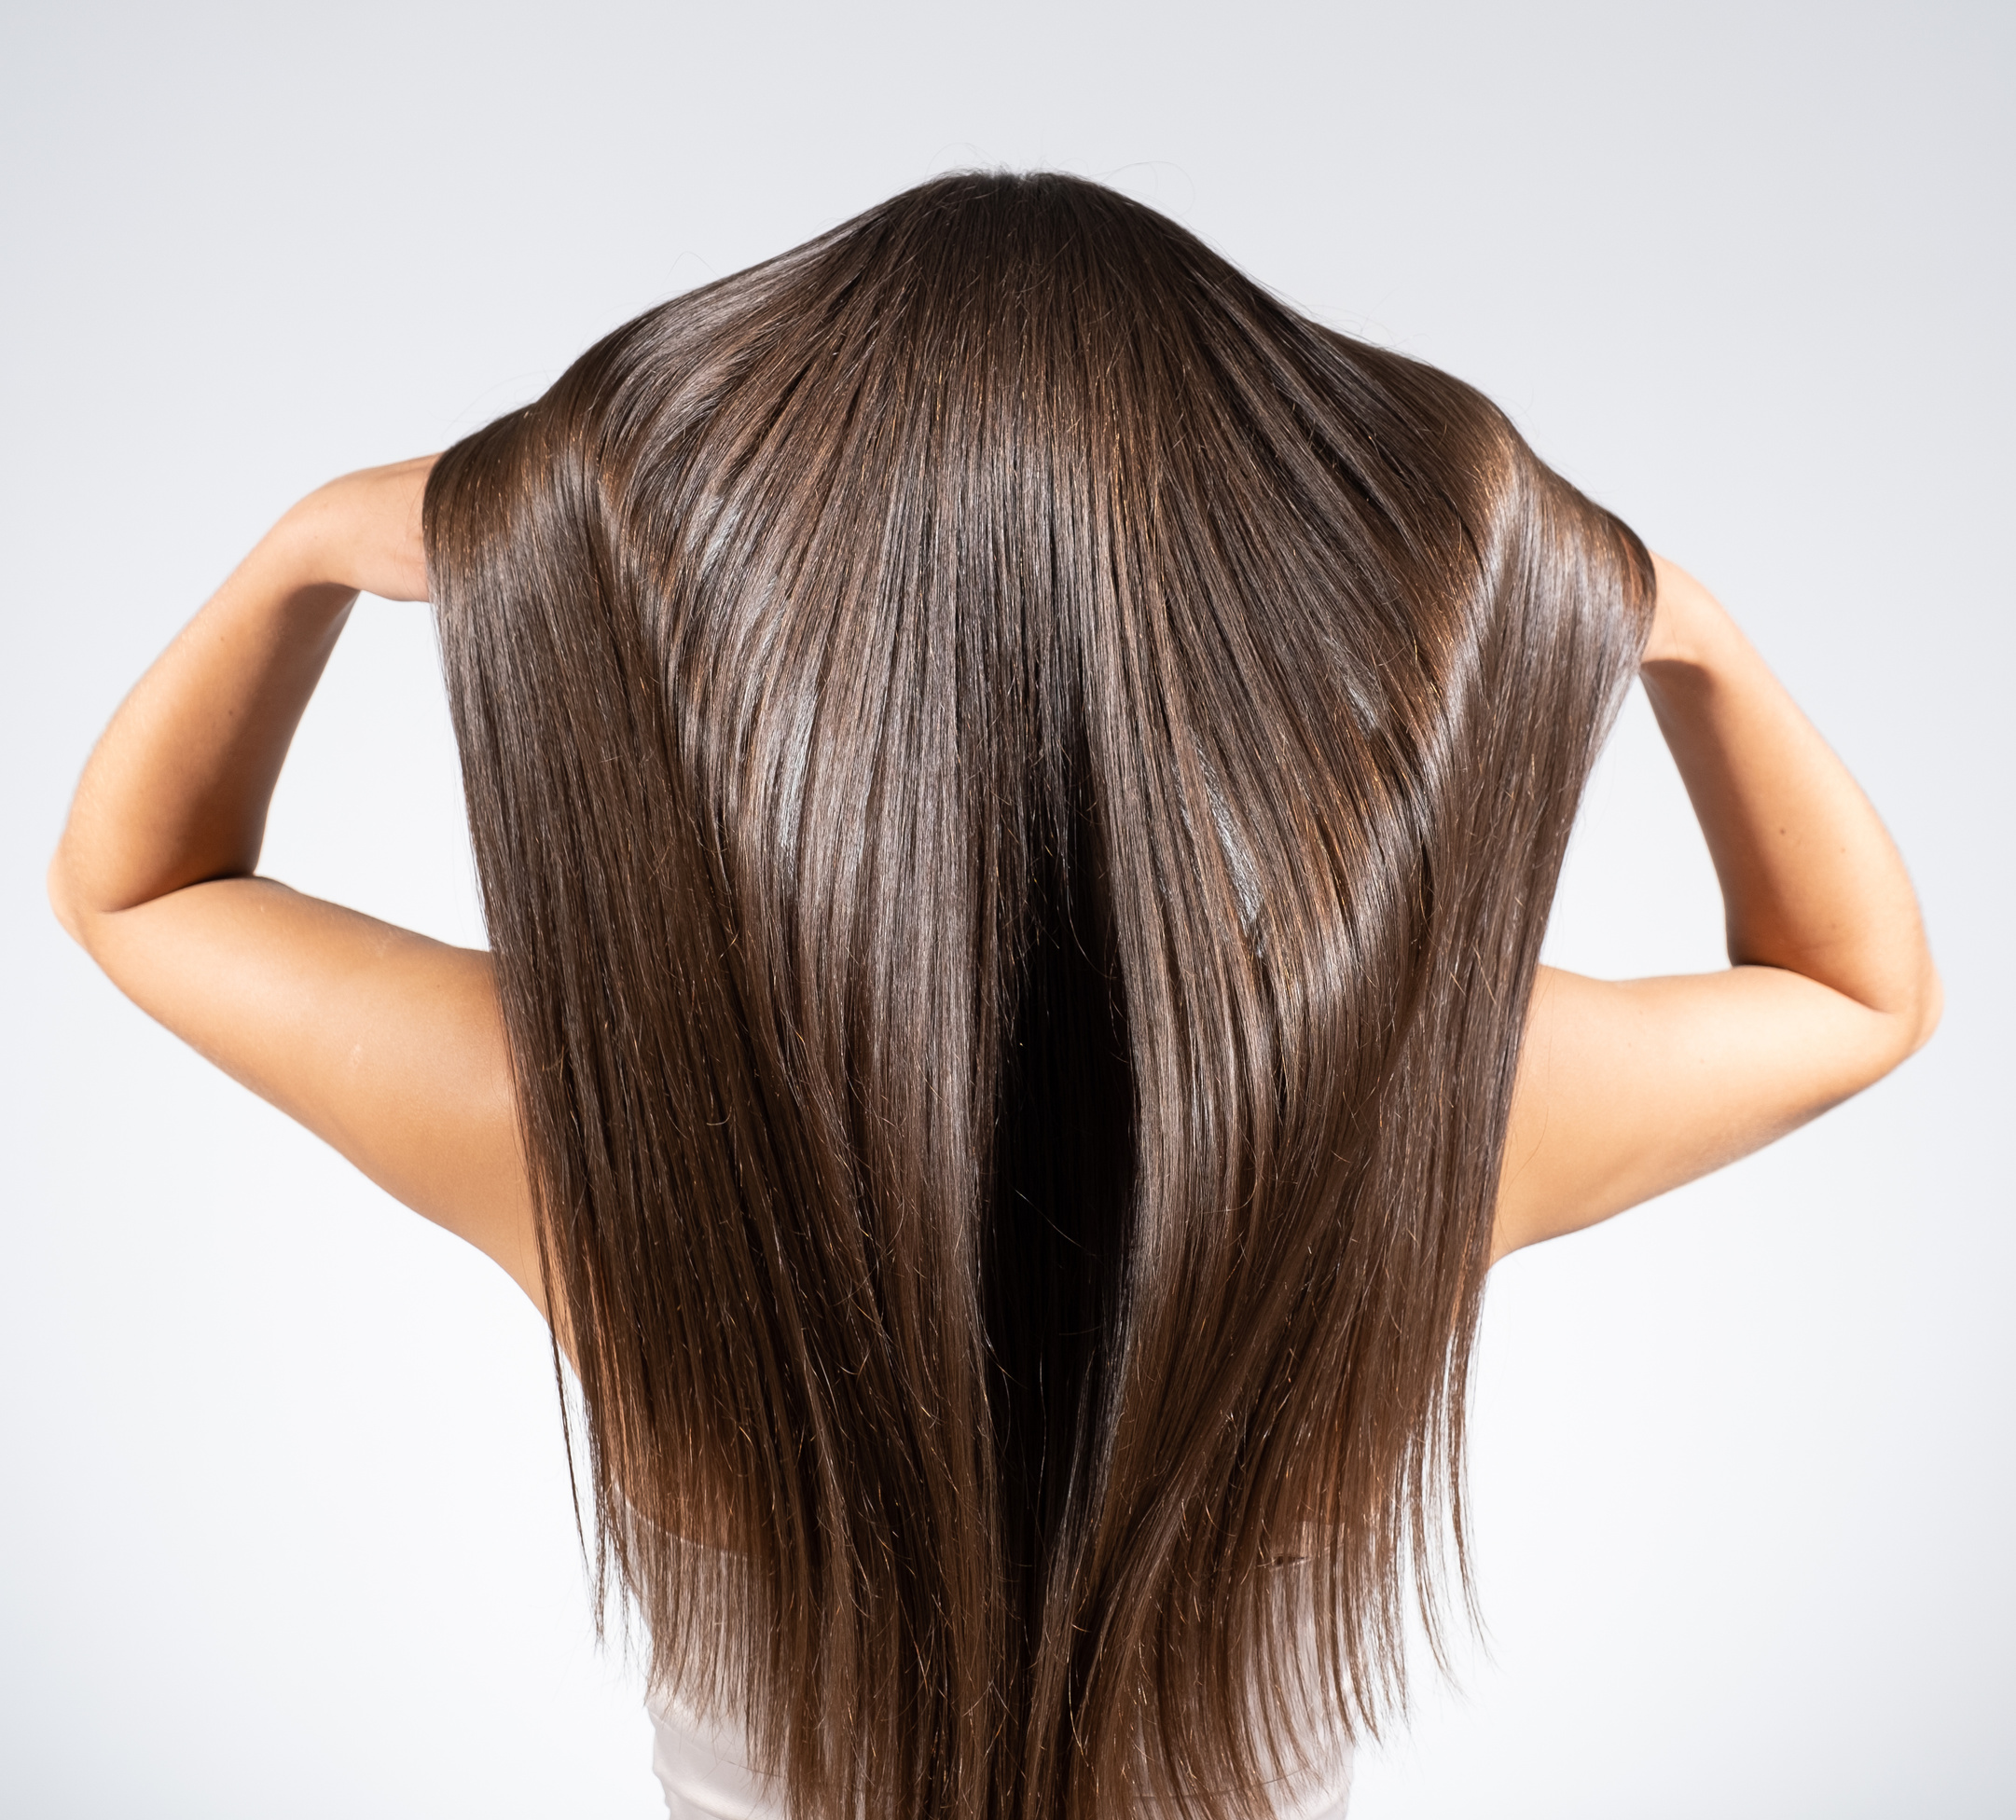 Back View of a Brunette Woman with a Long Straight Hair.